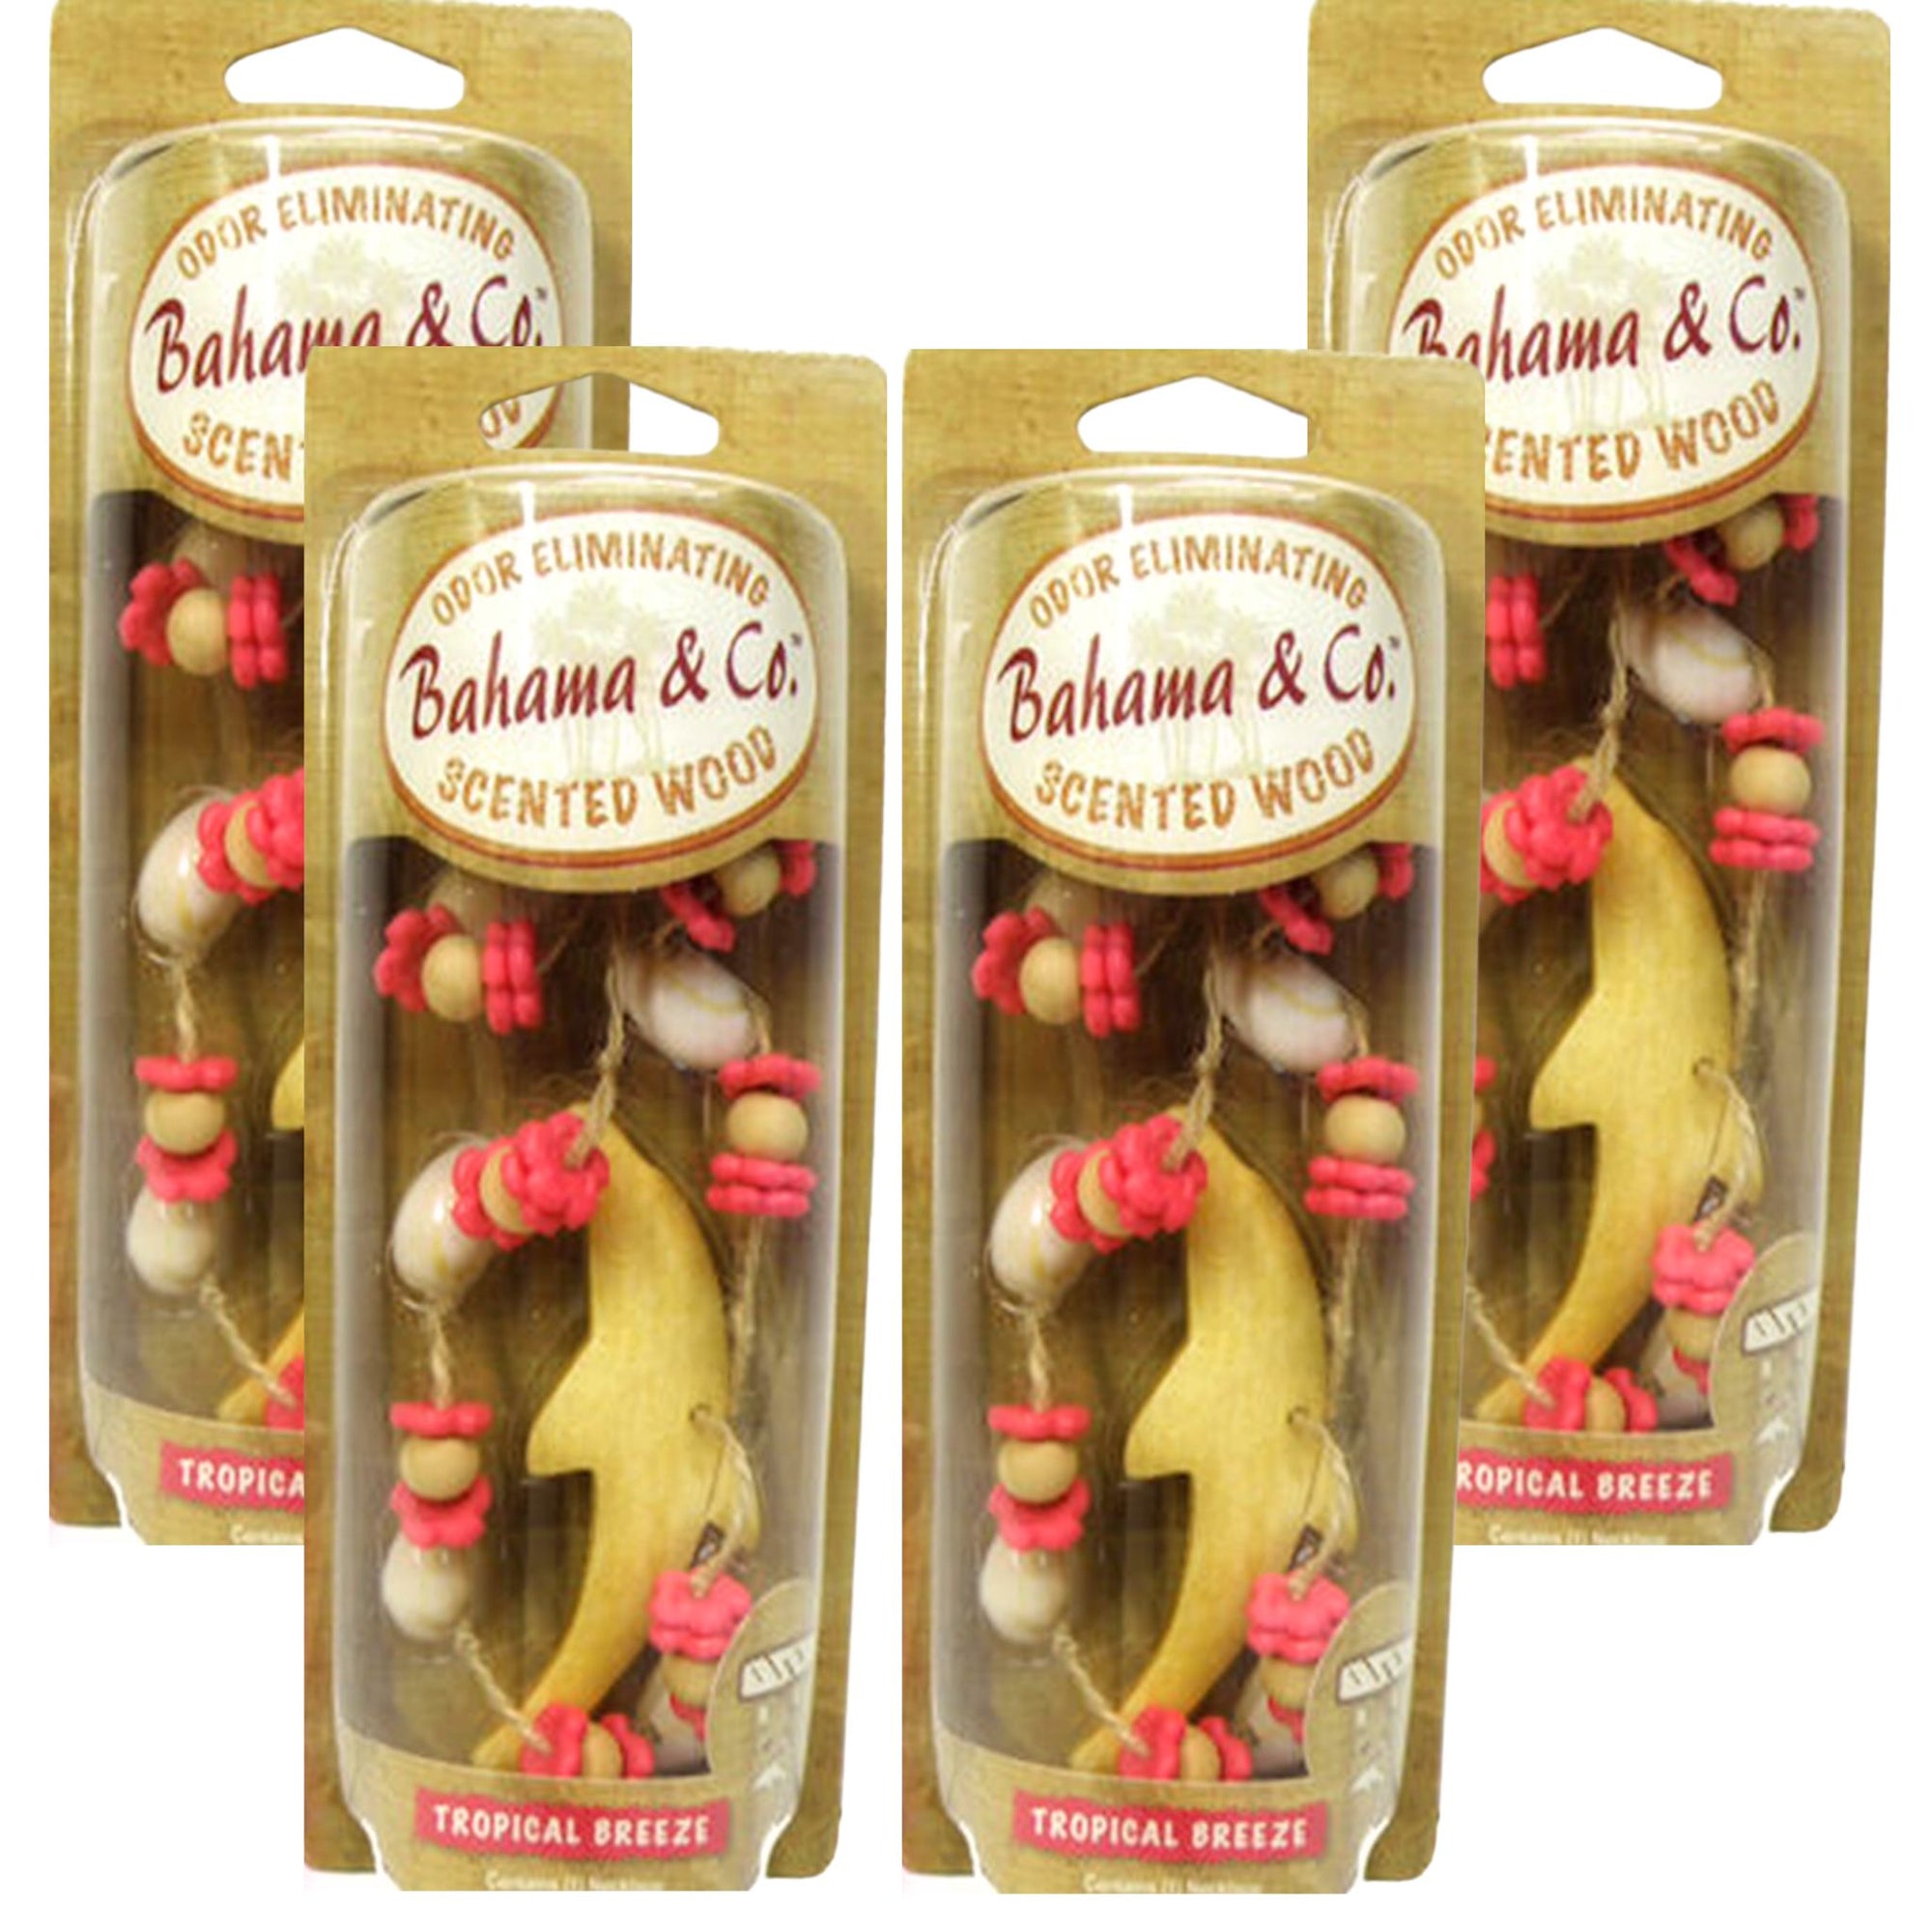 4 pack Air Fresheners Bahama Wood Necklace Tropical Breeze | 06718 - South East Clearance Centre